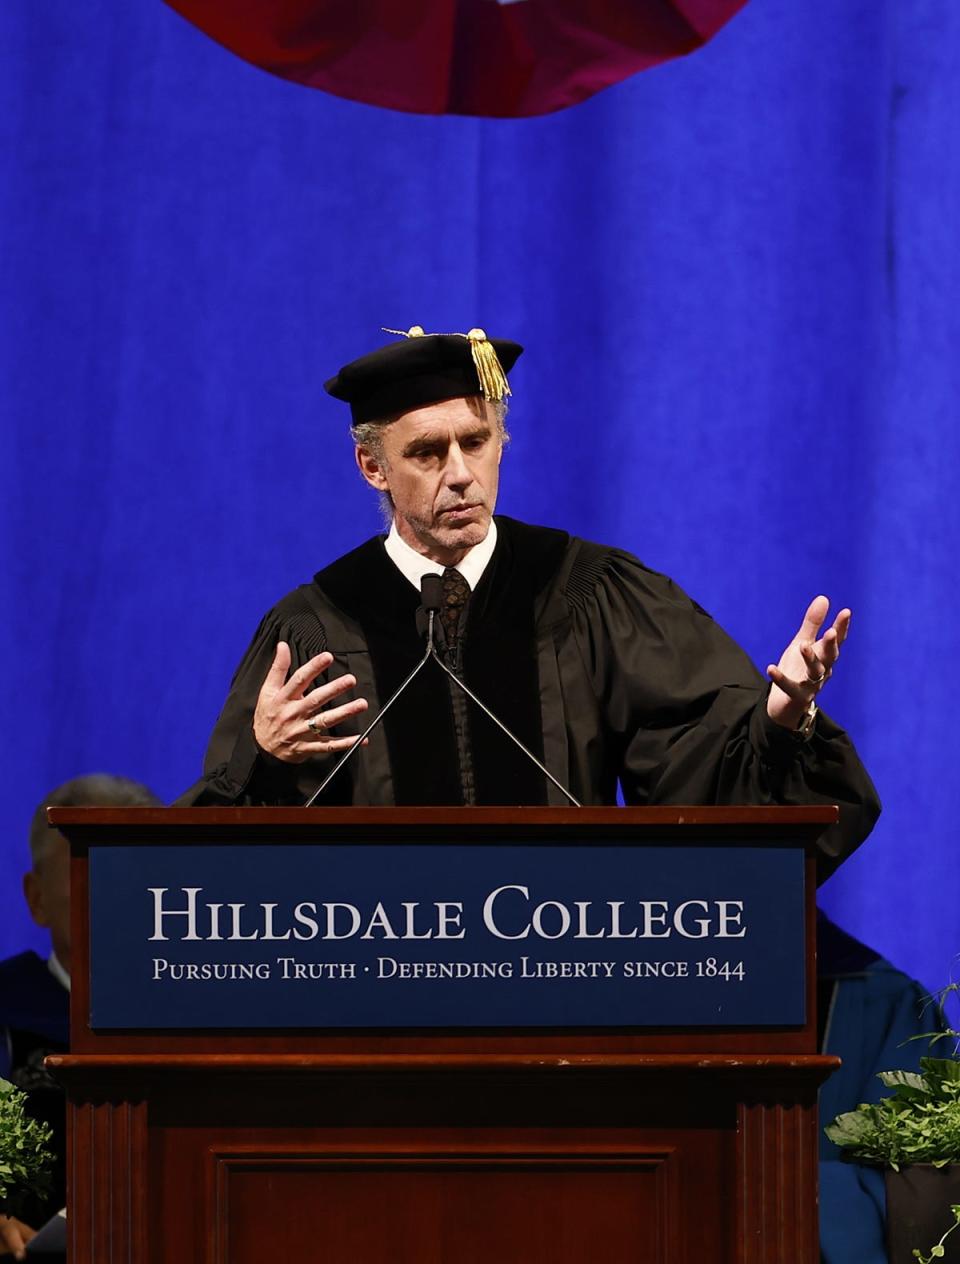 Jordan B. Peterson, author, clinical psychologist, and professor emeritus at the University of Toronto, delivered the keynote address at Saturday's Hillsdale College commencement ceremony.